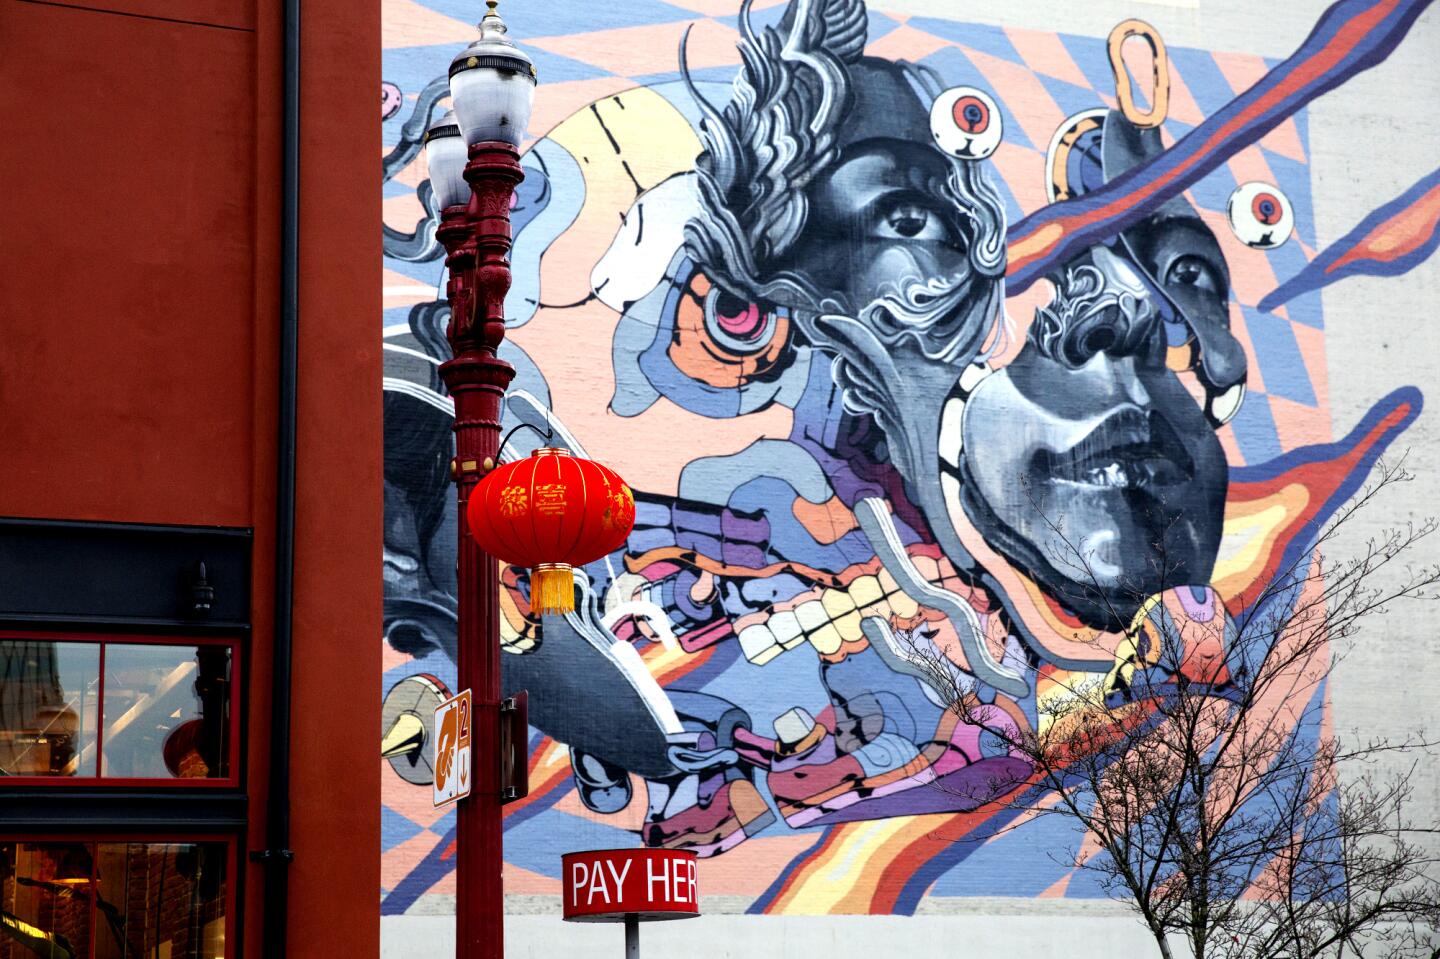 A mural in Portland's Chinatown.